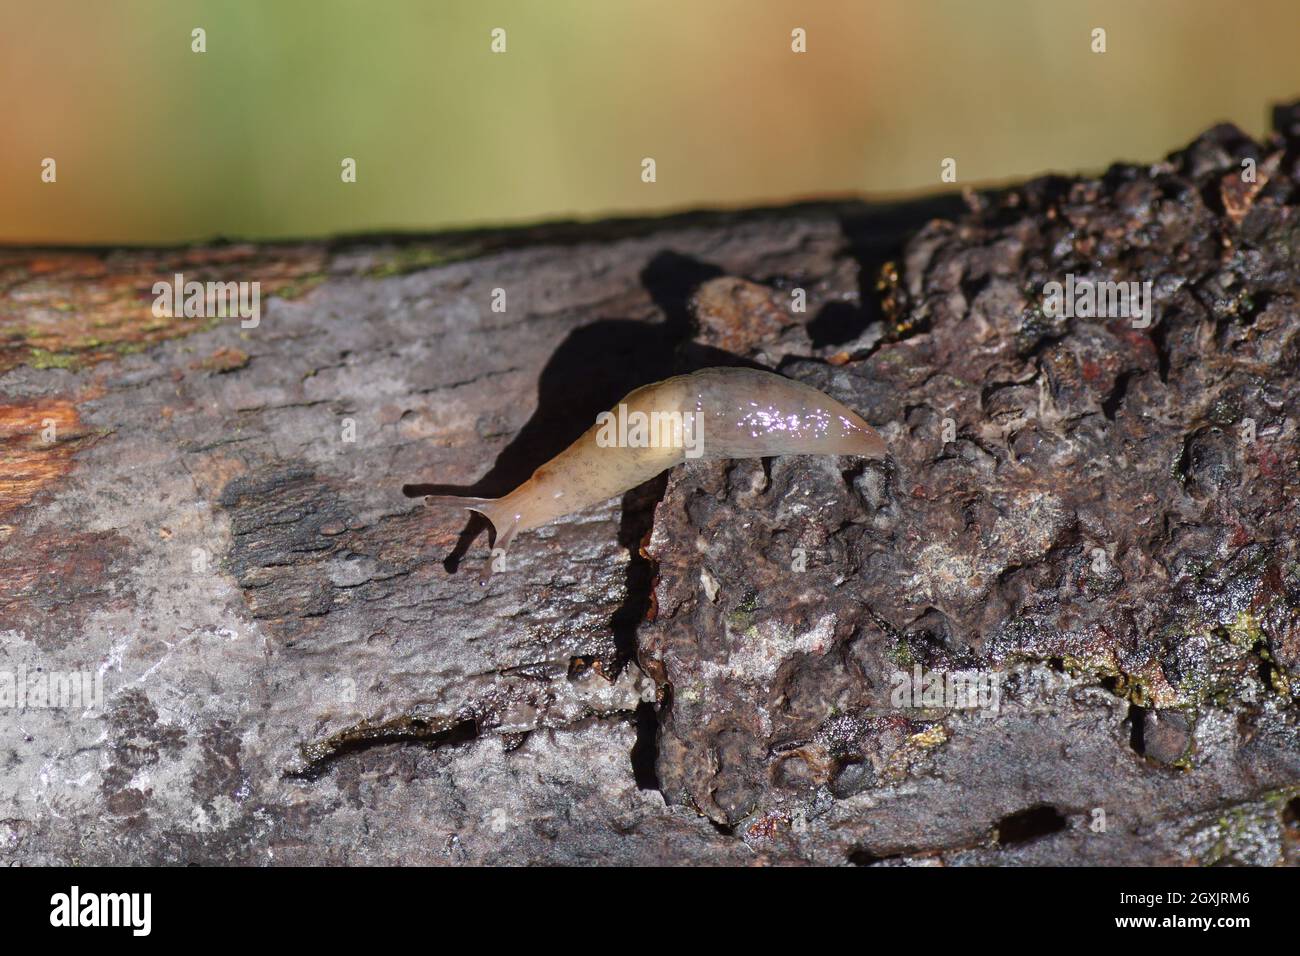 Caruana's slug (Deroceras caruanae / invadens: Agriolimacidae), with their  dart-sacs inflated, in circling courtship UK Stock Photo - Alamy